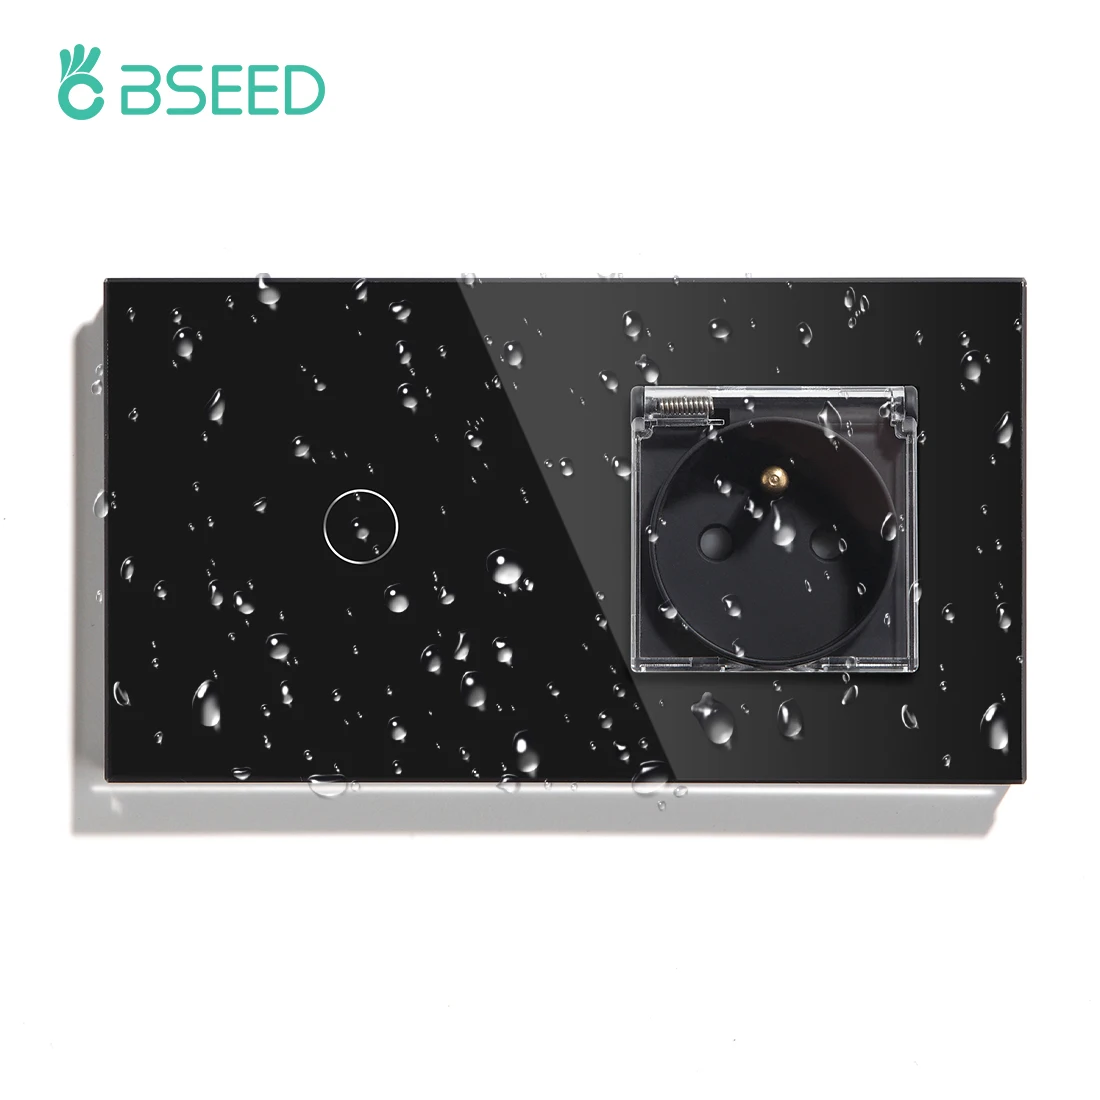 BSEED French Standard WaterProof FR socket with touch switch 1 Gang 1 Way 2Way Crystal Glass Panel home improve product